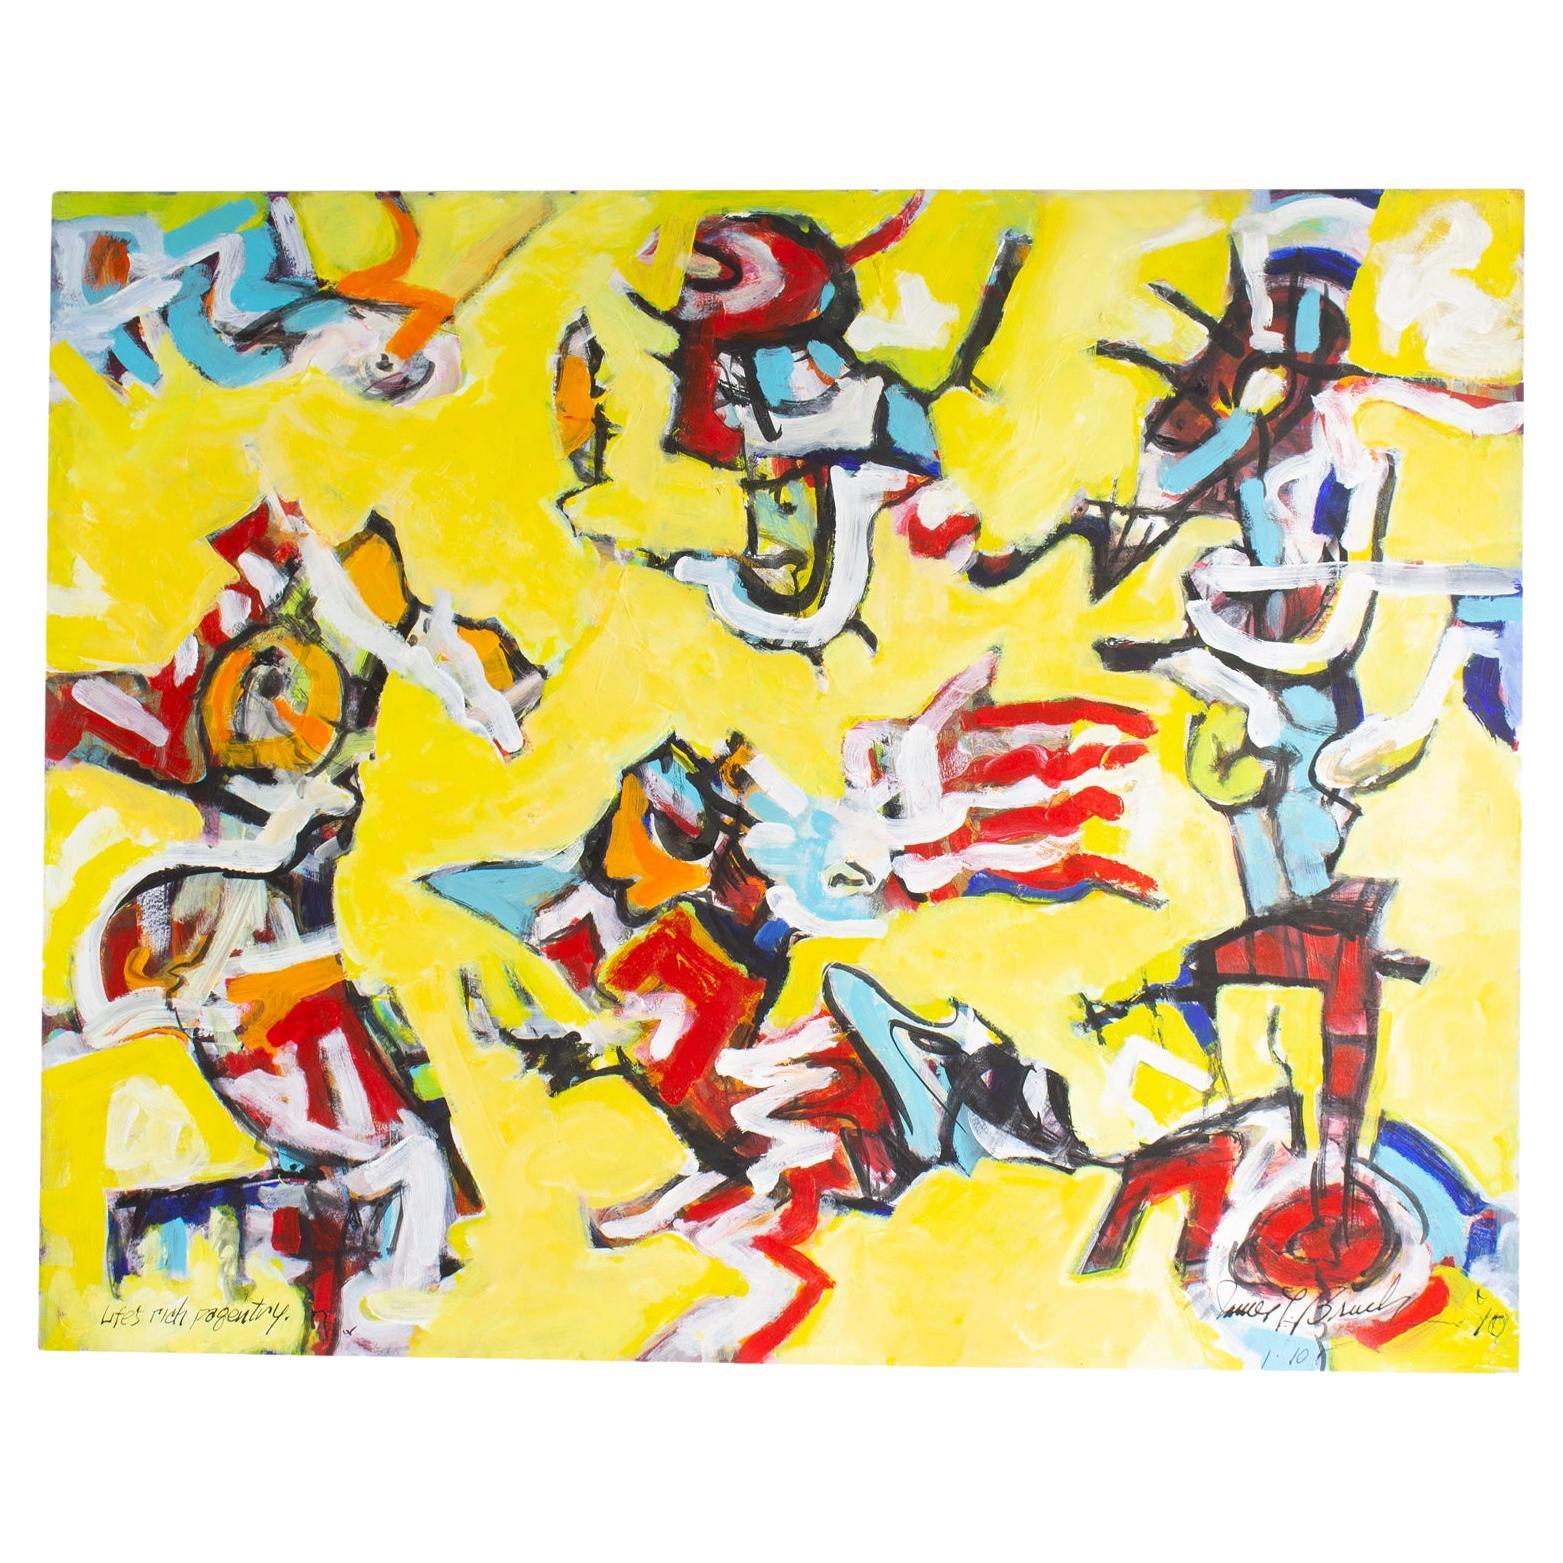 James L. Bruch Signed 2010 “Life’s Rich Pageantry” Abstract Acrylic Painting For Sale